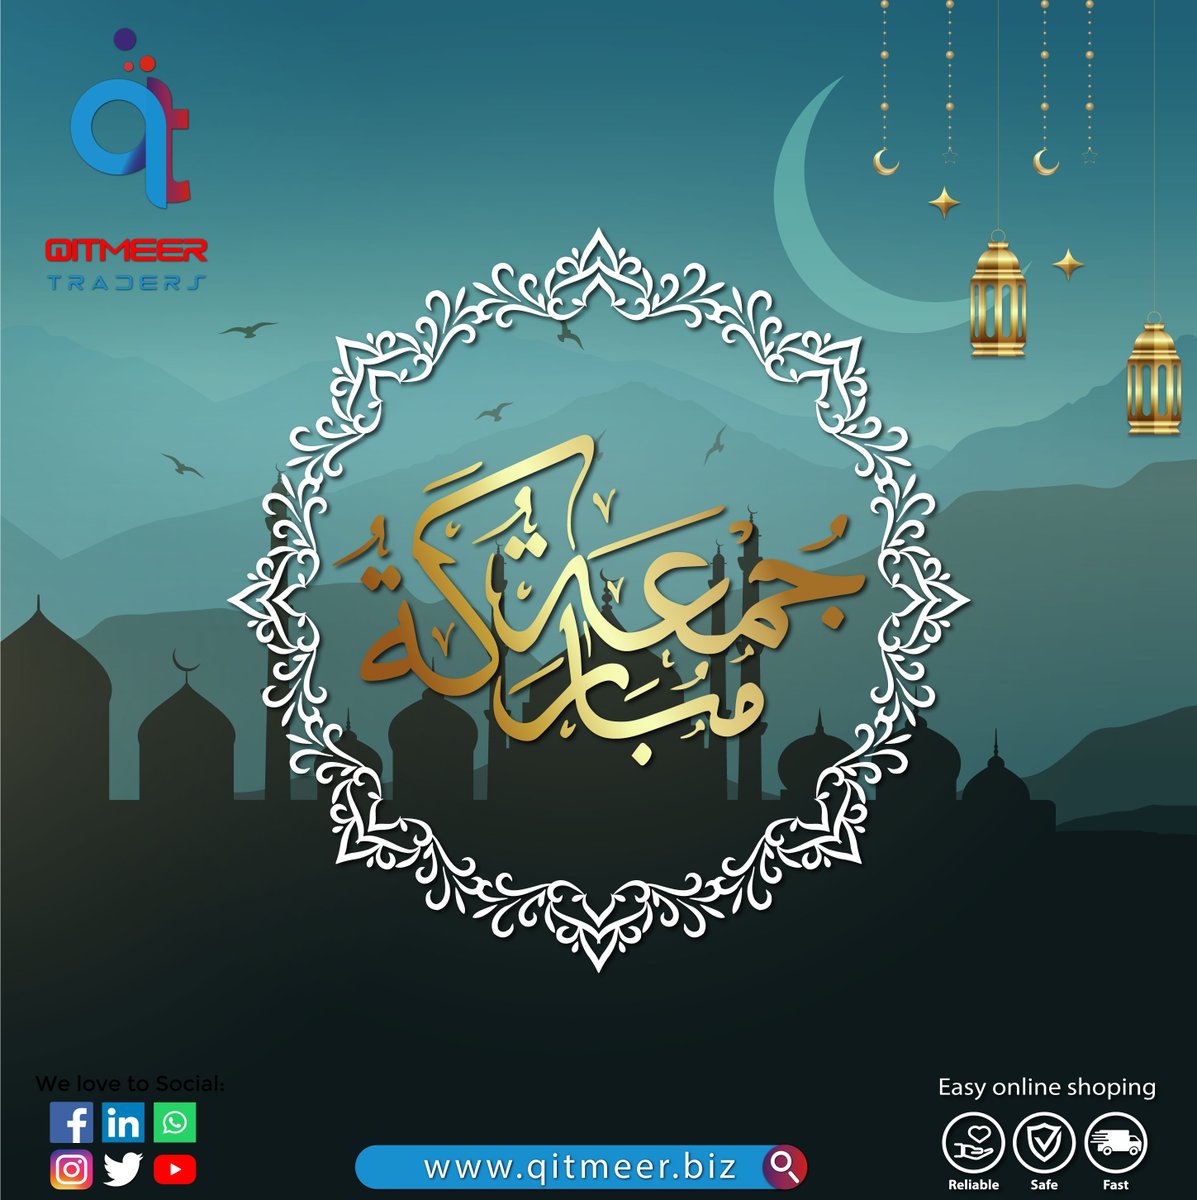 Greetings!
Juma-tul-Mubarak to all our Followers, Customers & Business Partners from the heart of the all Qitmeer Trader’s staff! May ALLAH-Subhan-O-Taala bless us all with Peace, good Health, wealth & Prosperity Ameen!

#toolset #professionaltools #toolshop #toolsale #wholesale